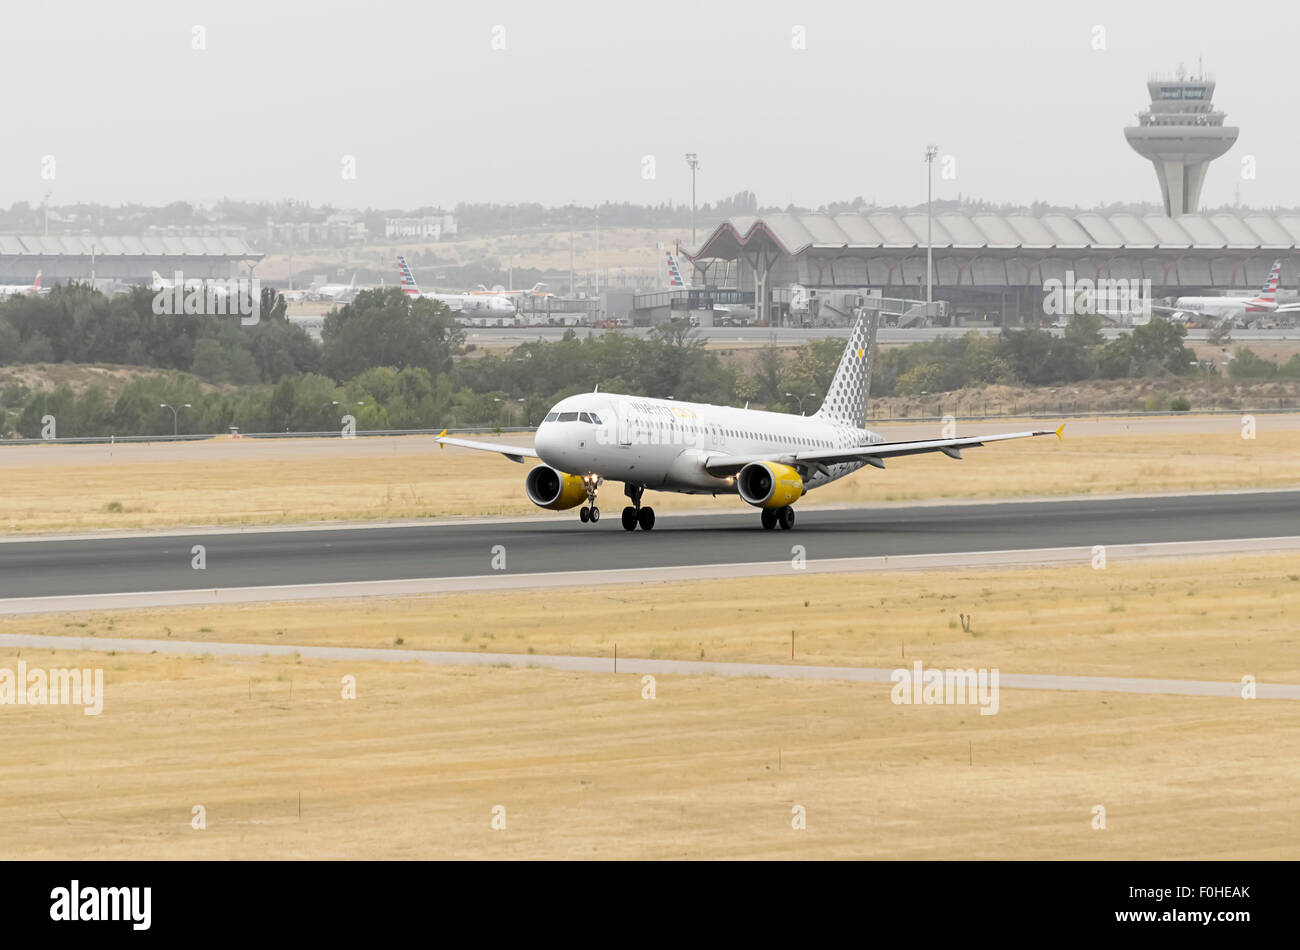 Aircraft -Airbus A320-214-, of -Vueling- airline, is taking off from Madrid-Barajas -Adolfo Suarez- airport. Stock Photo